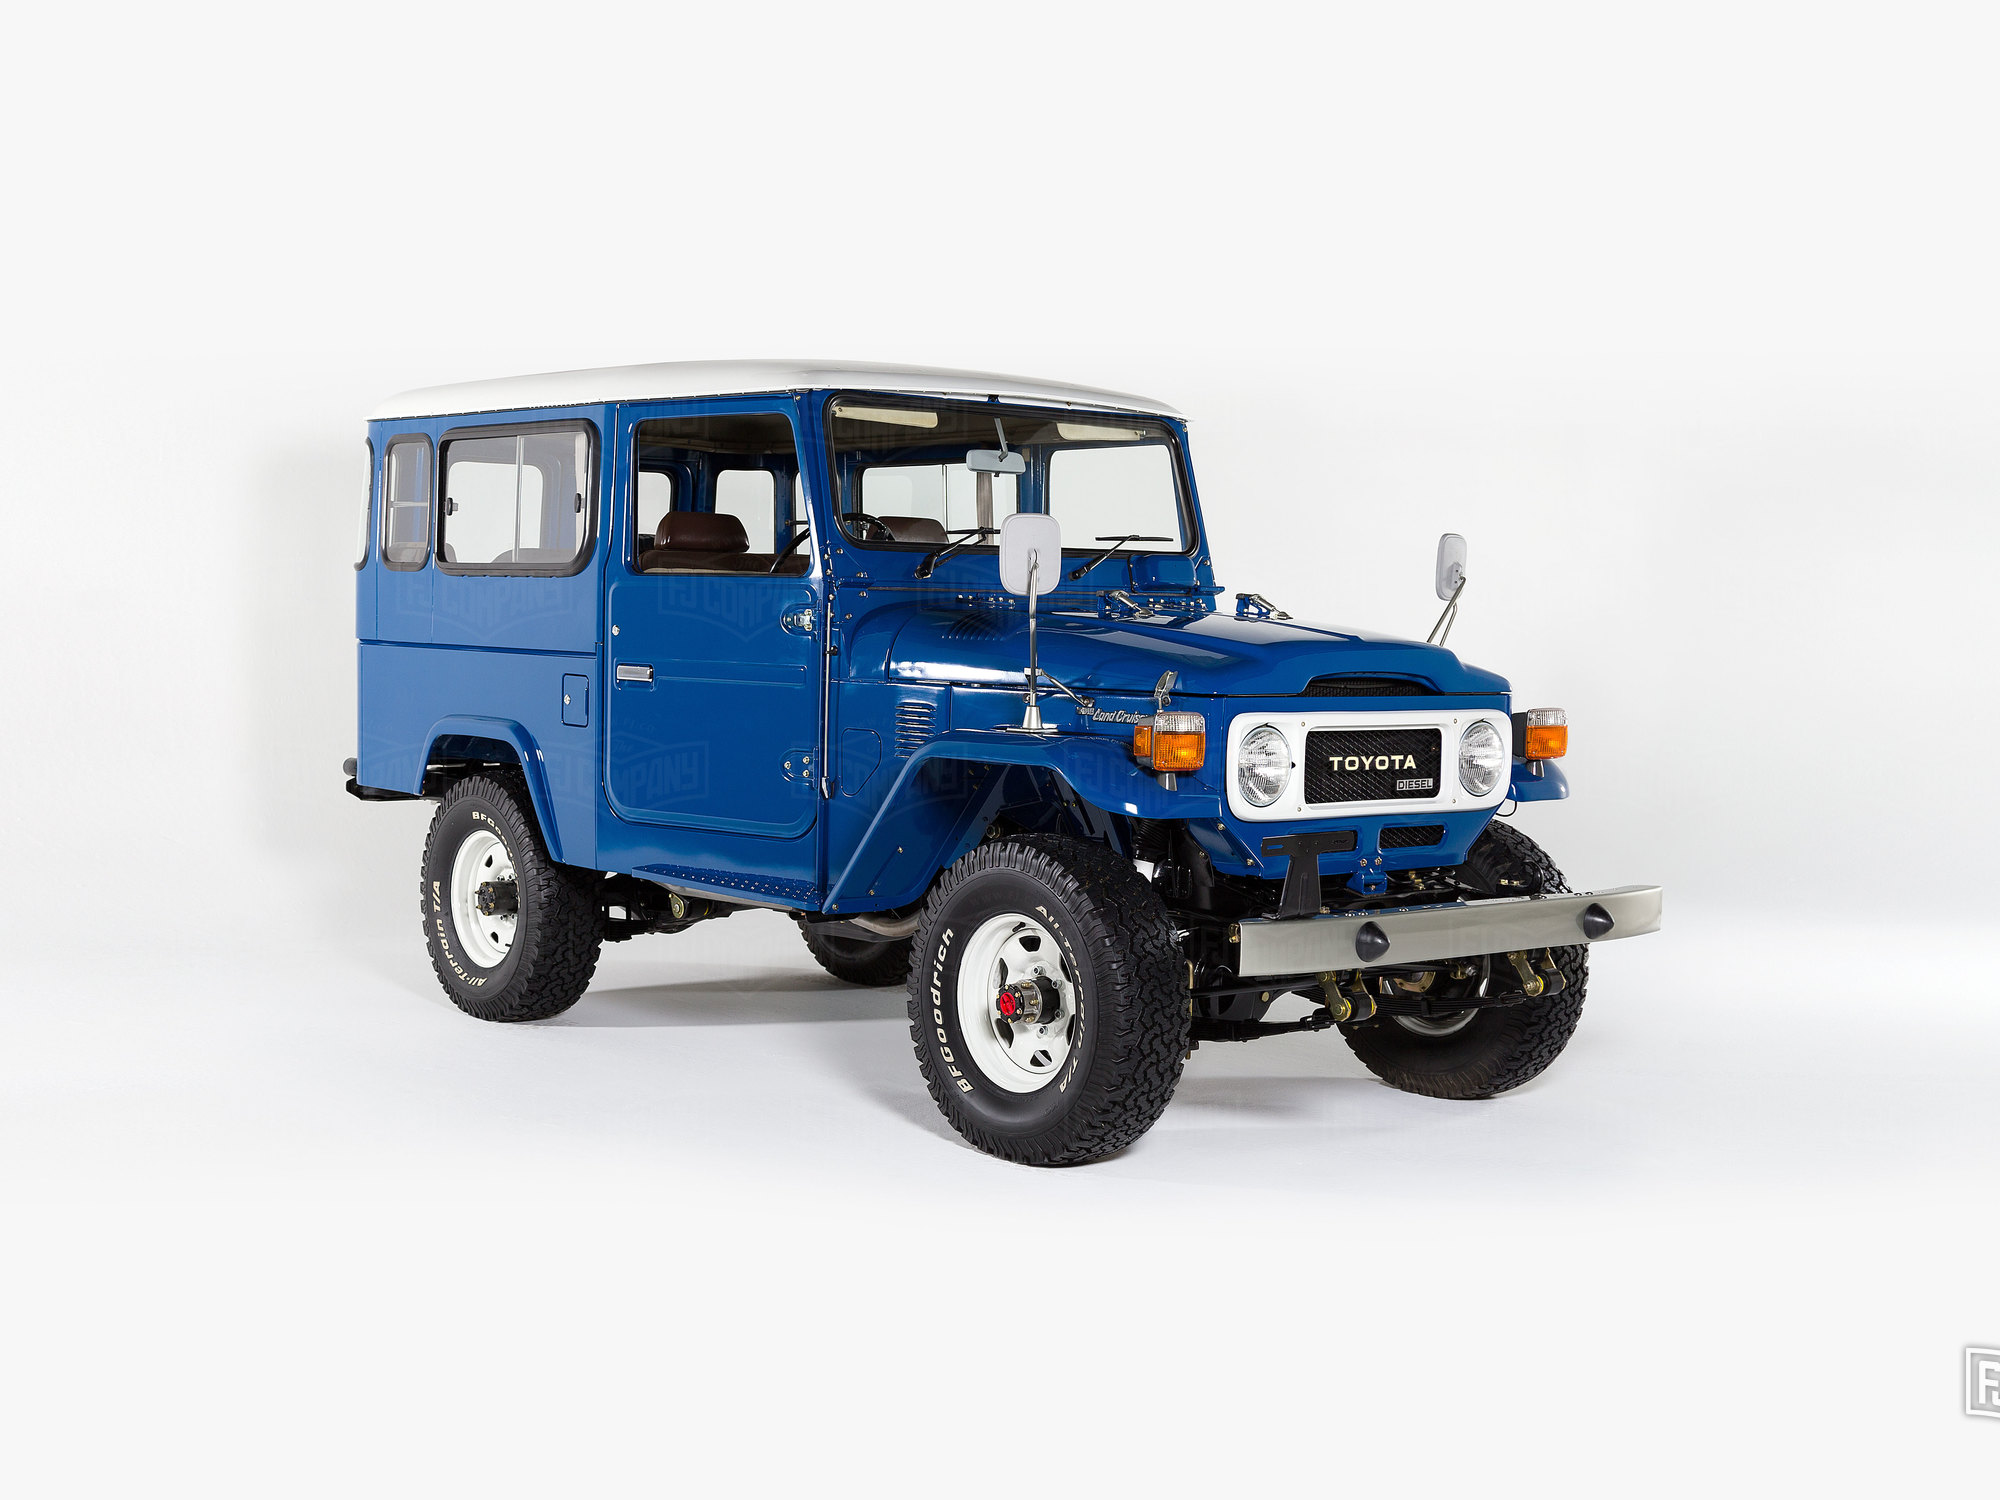 This right-hand drive BJ46 comes straight from Japan!